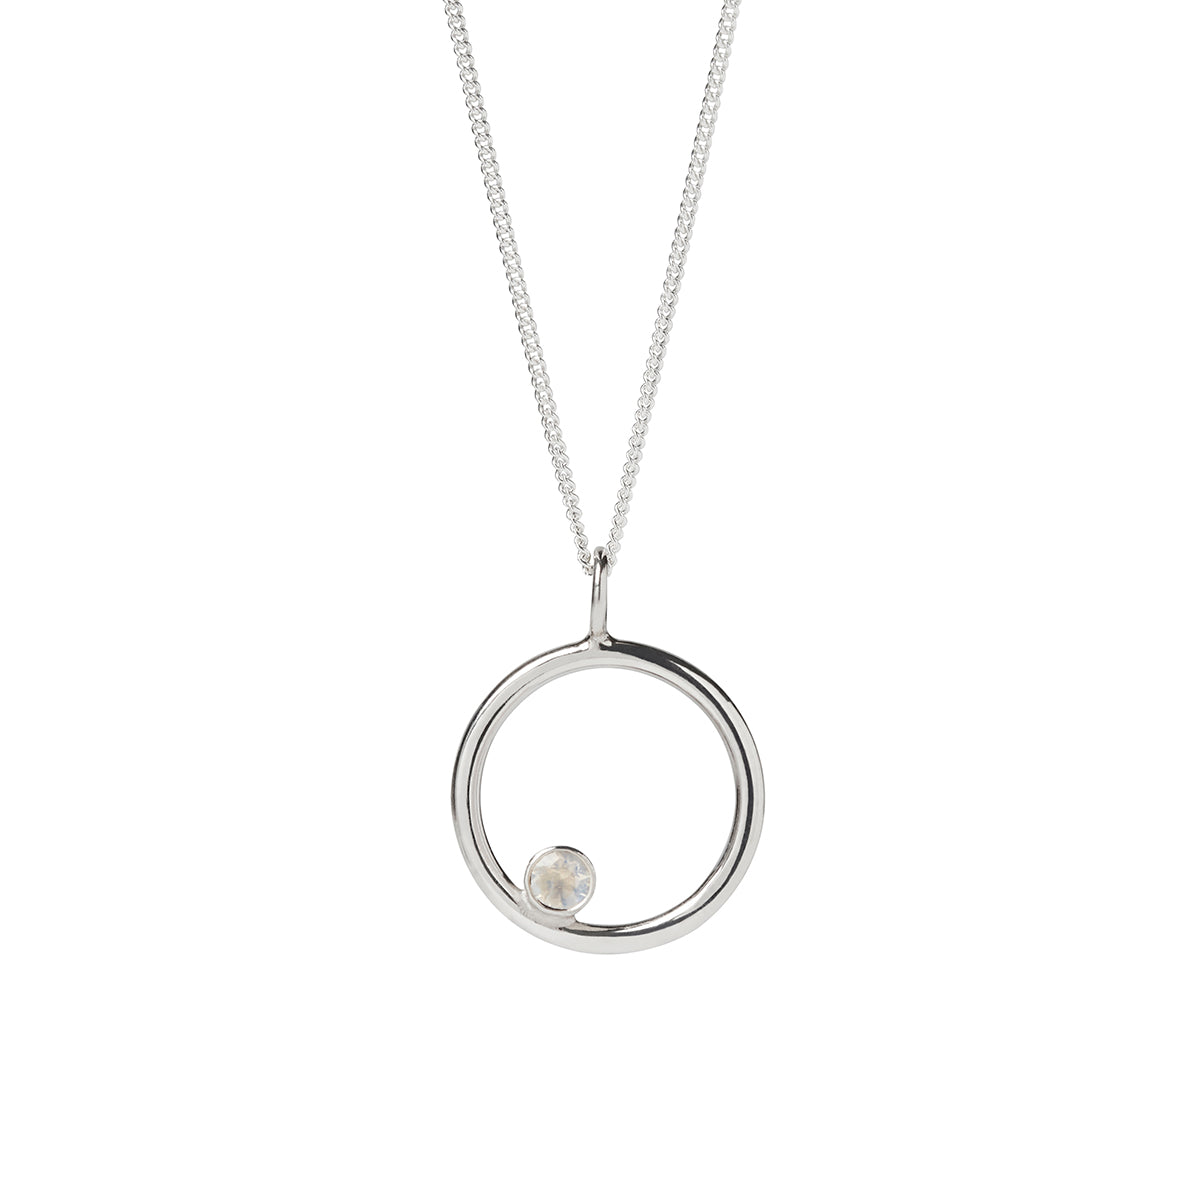 Moonstone and Silver Circle Pendant